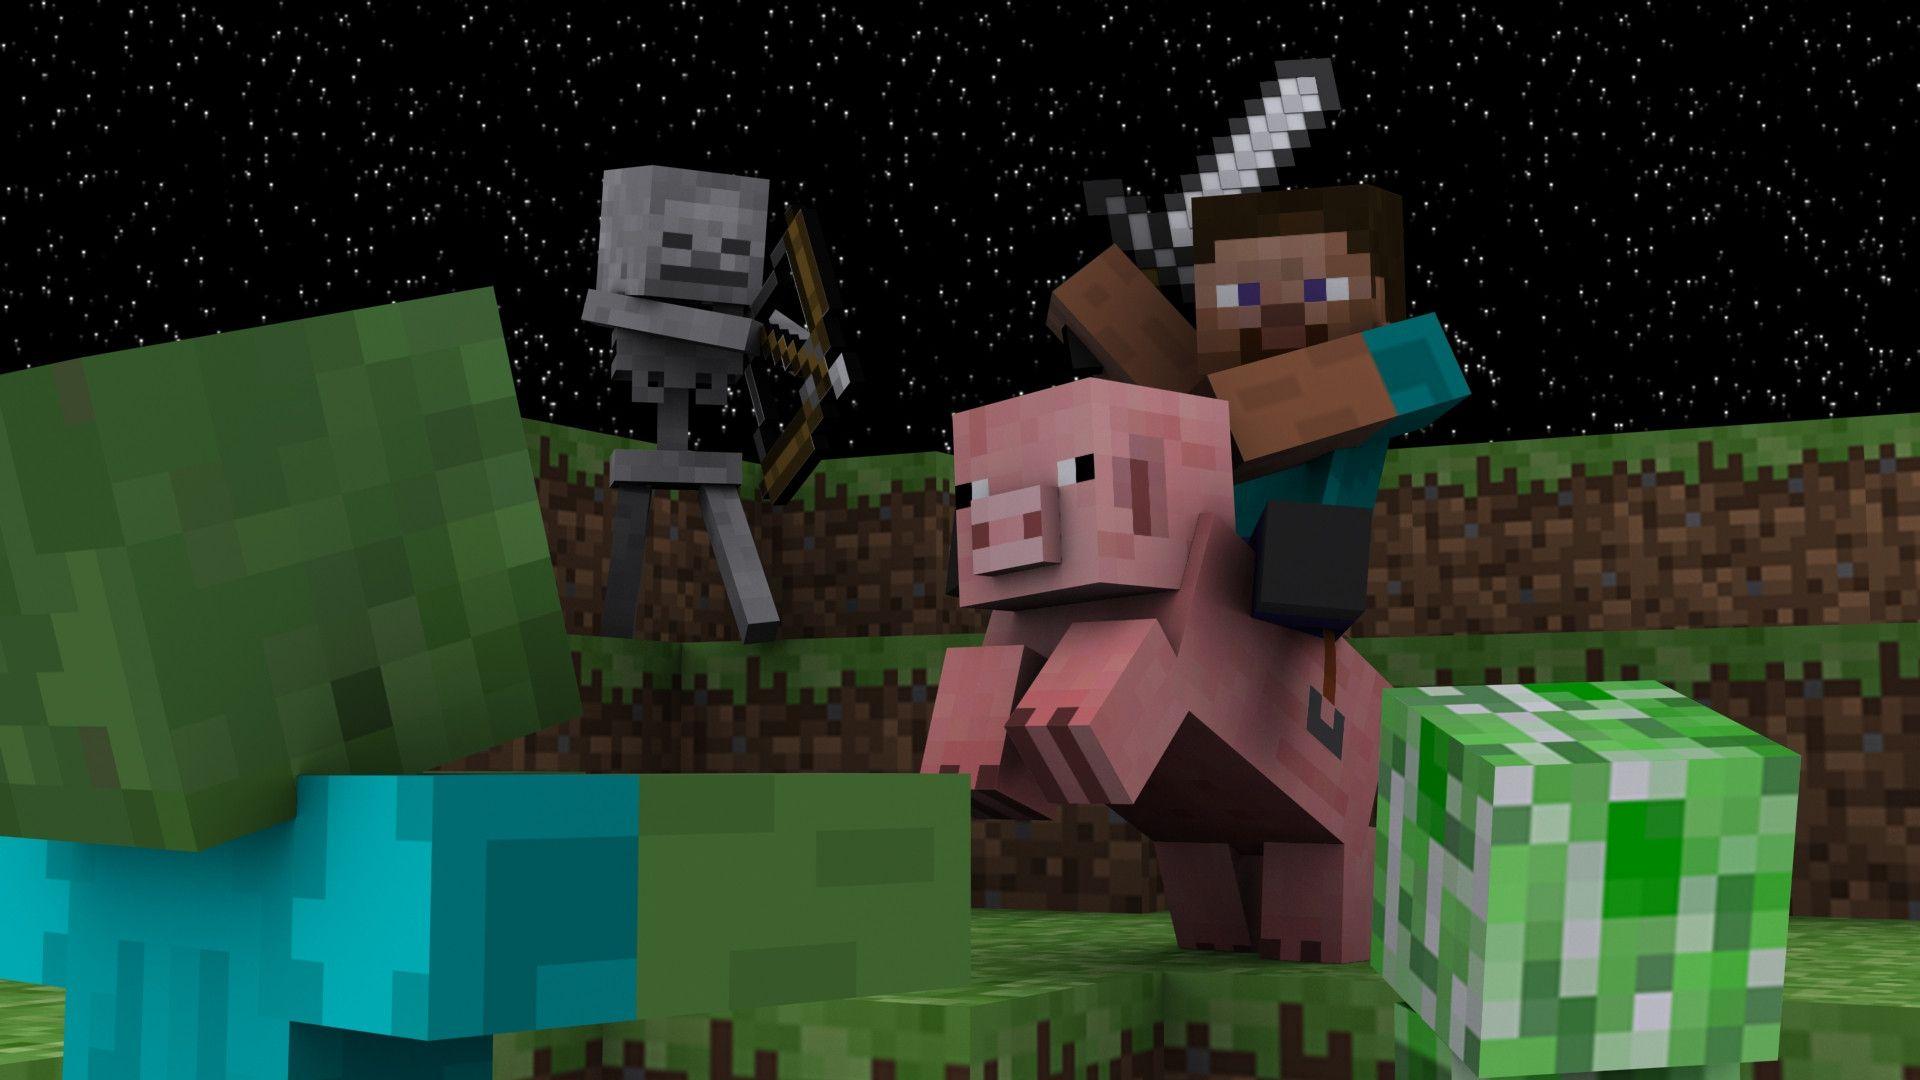 An epic Minecraft Wallpaper I made for my Digital Modeling class